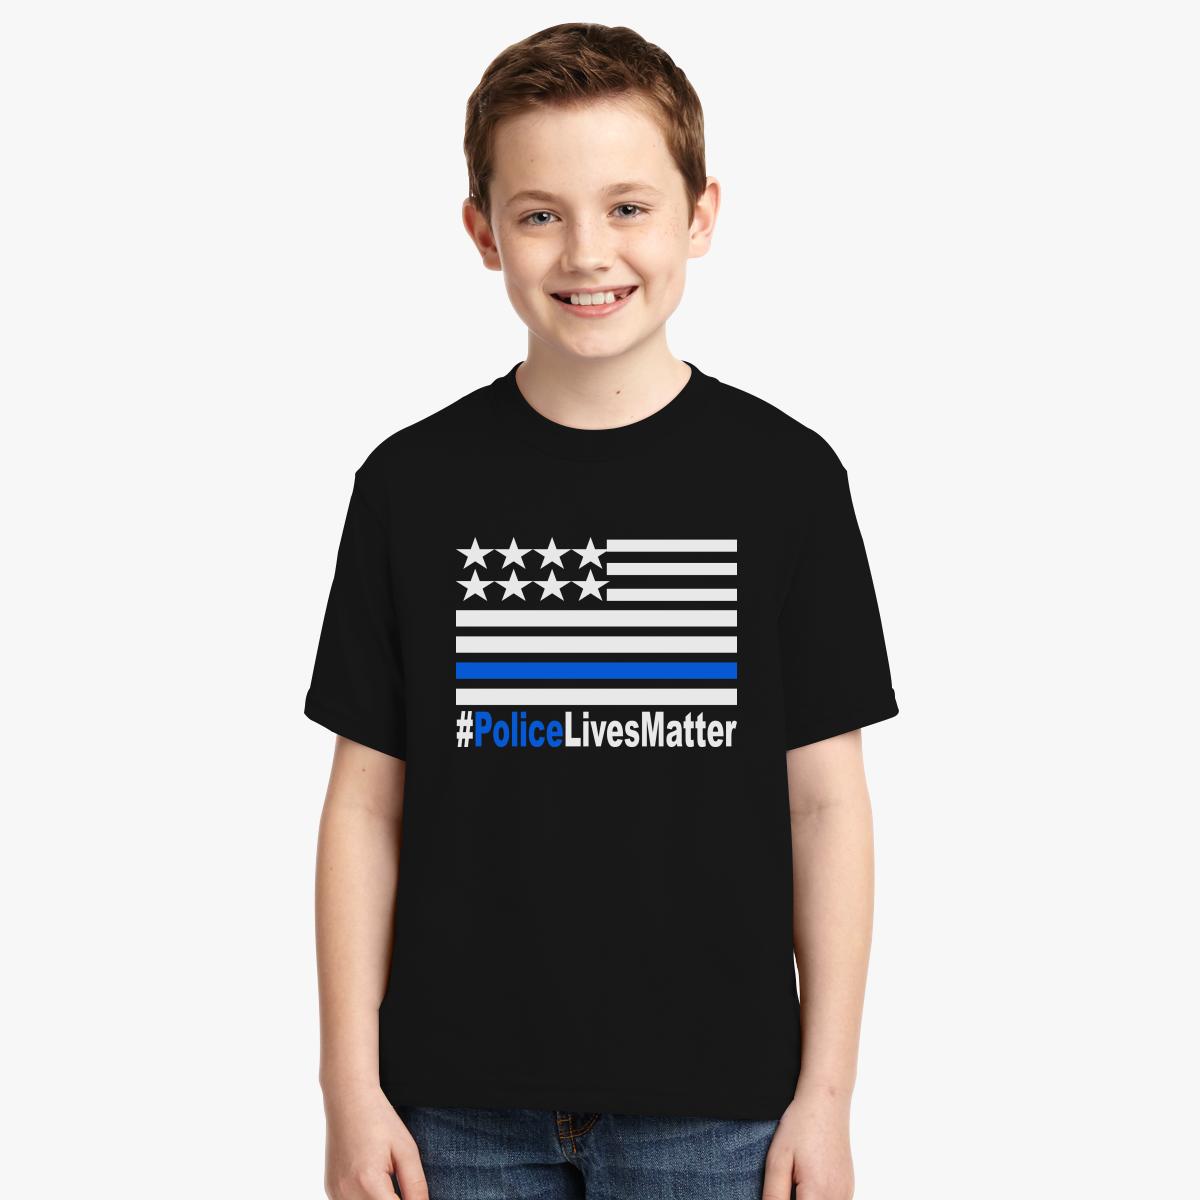 Roblox Police T Shirt Robux Codes Not Used - t shirts roblox nike agbu hye geen